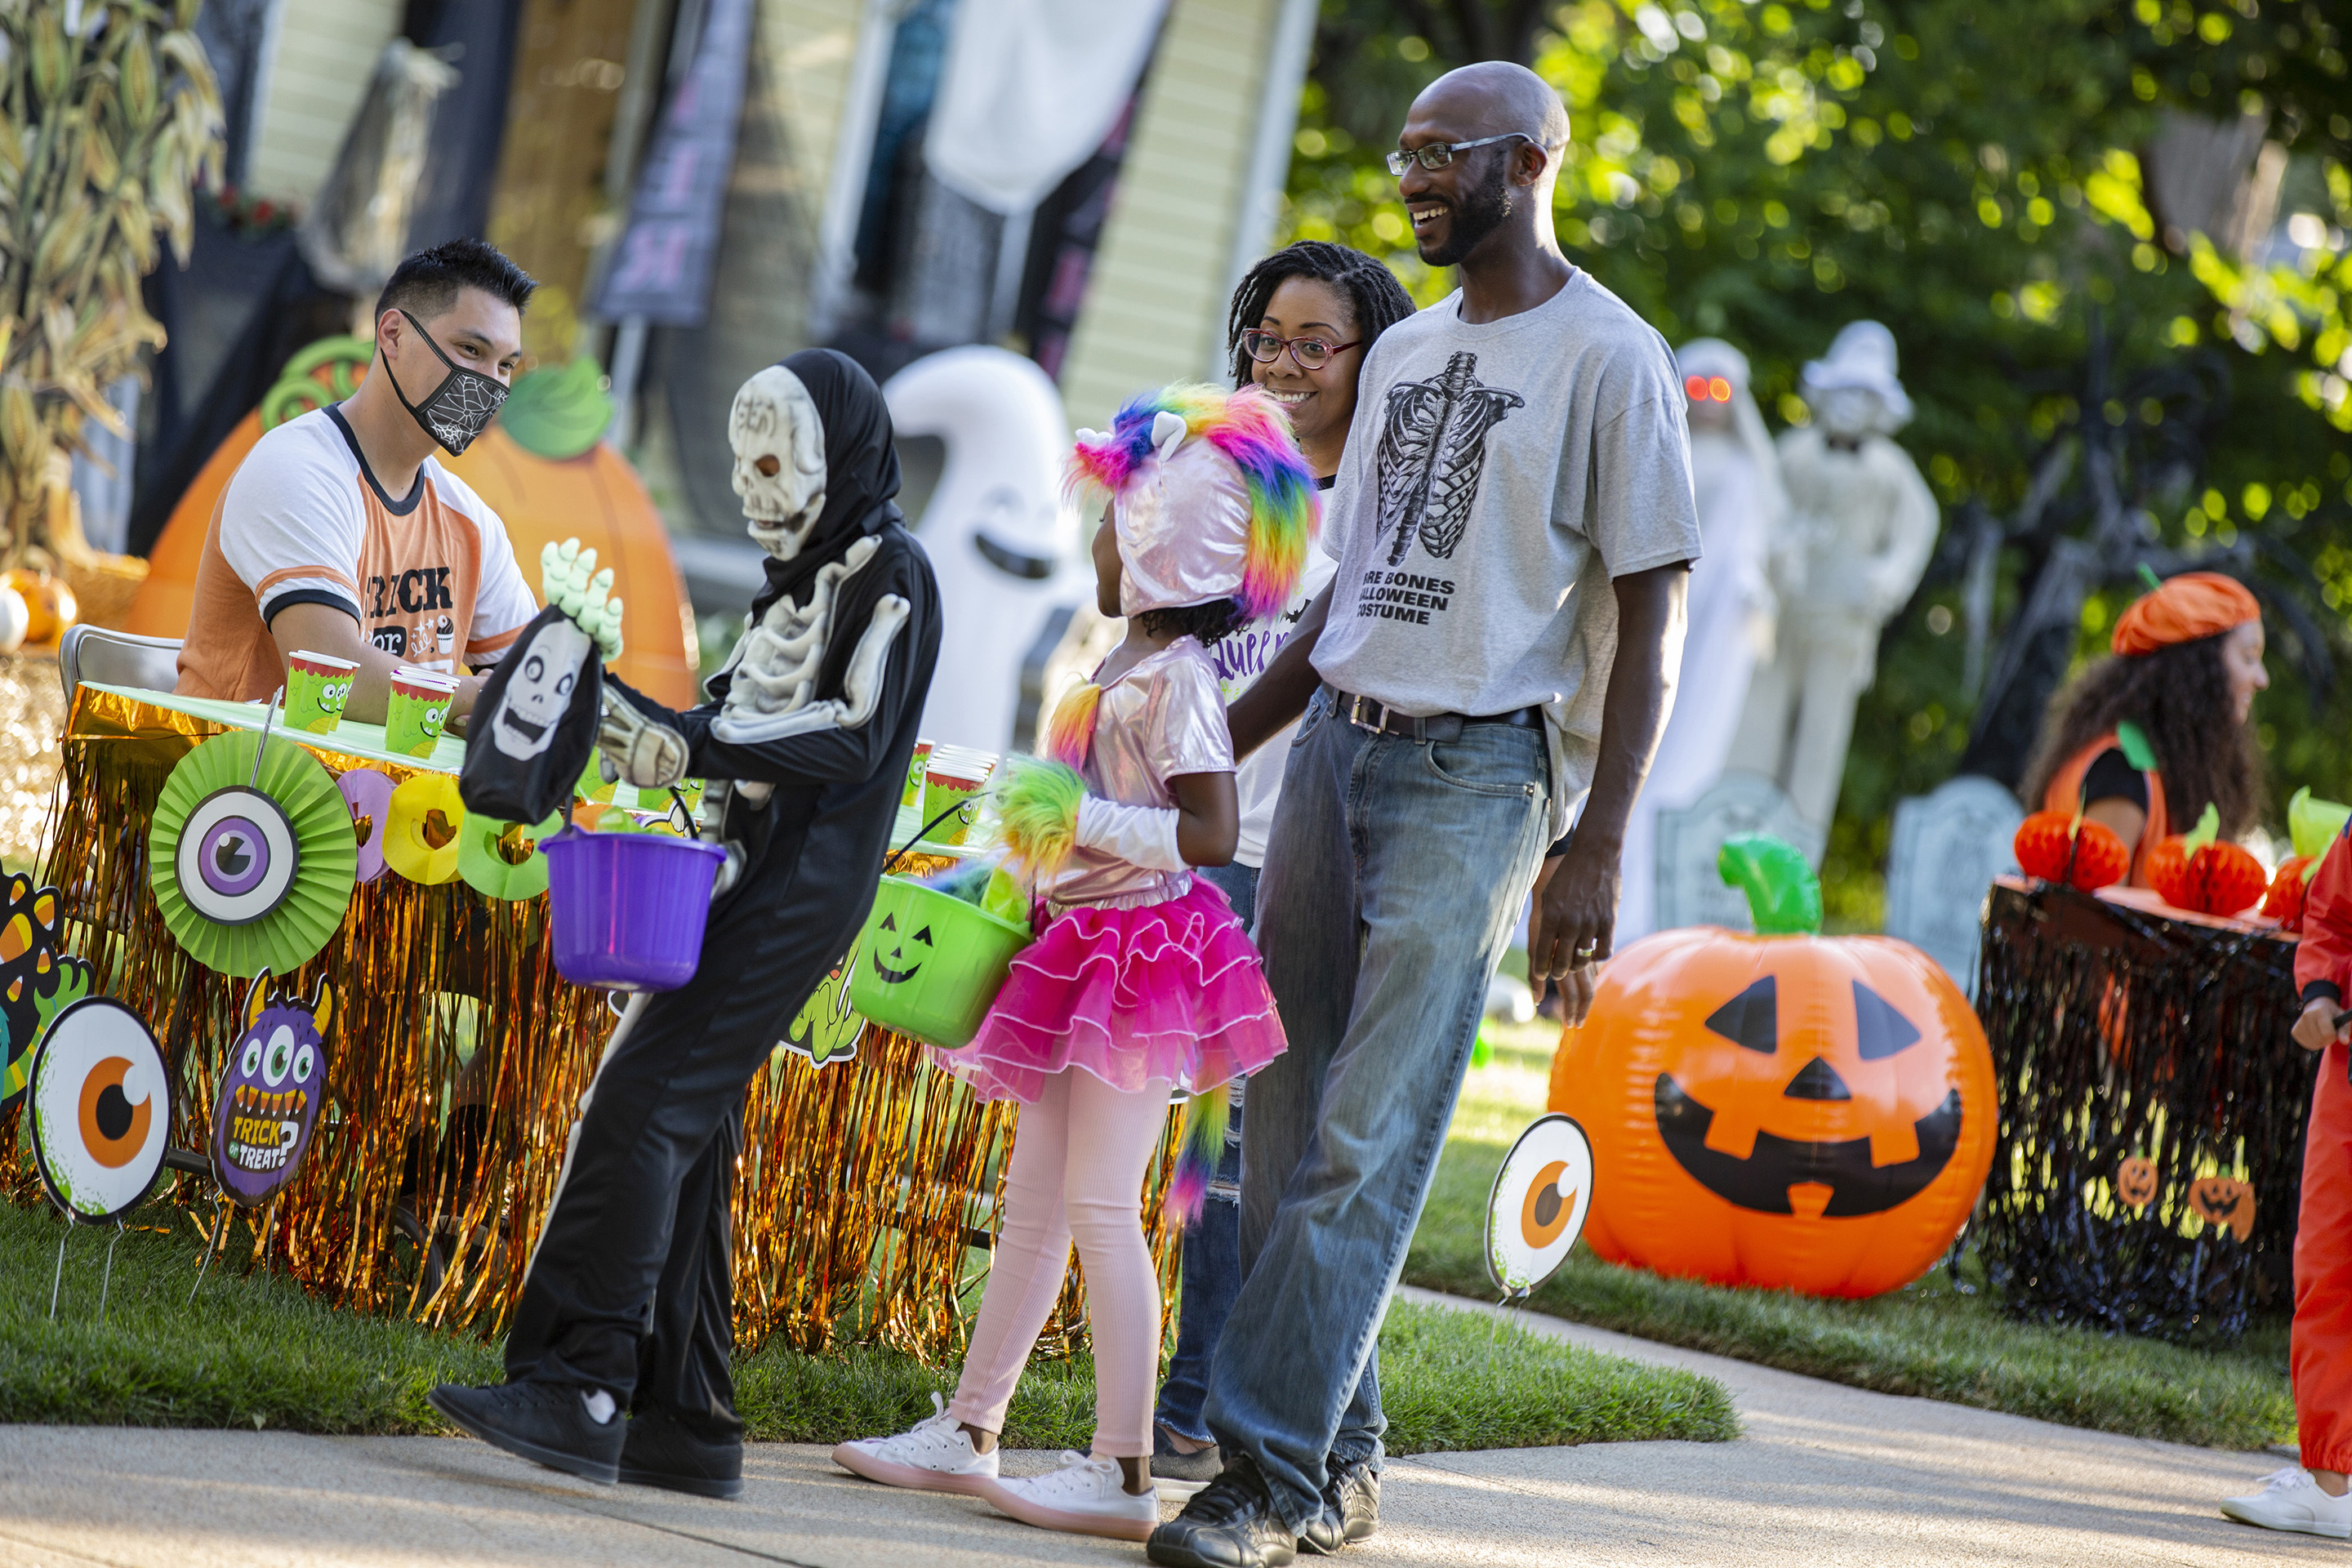 Oriental Trading Shares 10 Low-Contact Trick-or-Treat Ideas for a